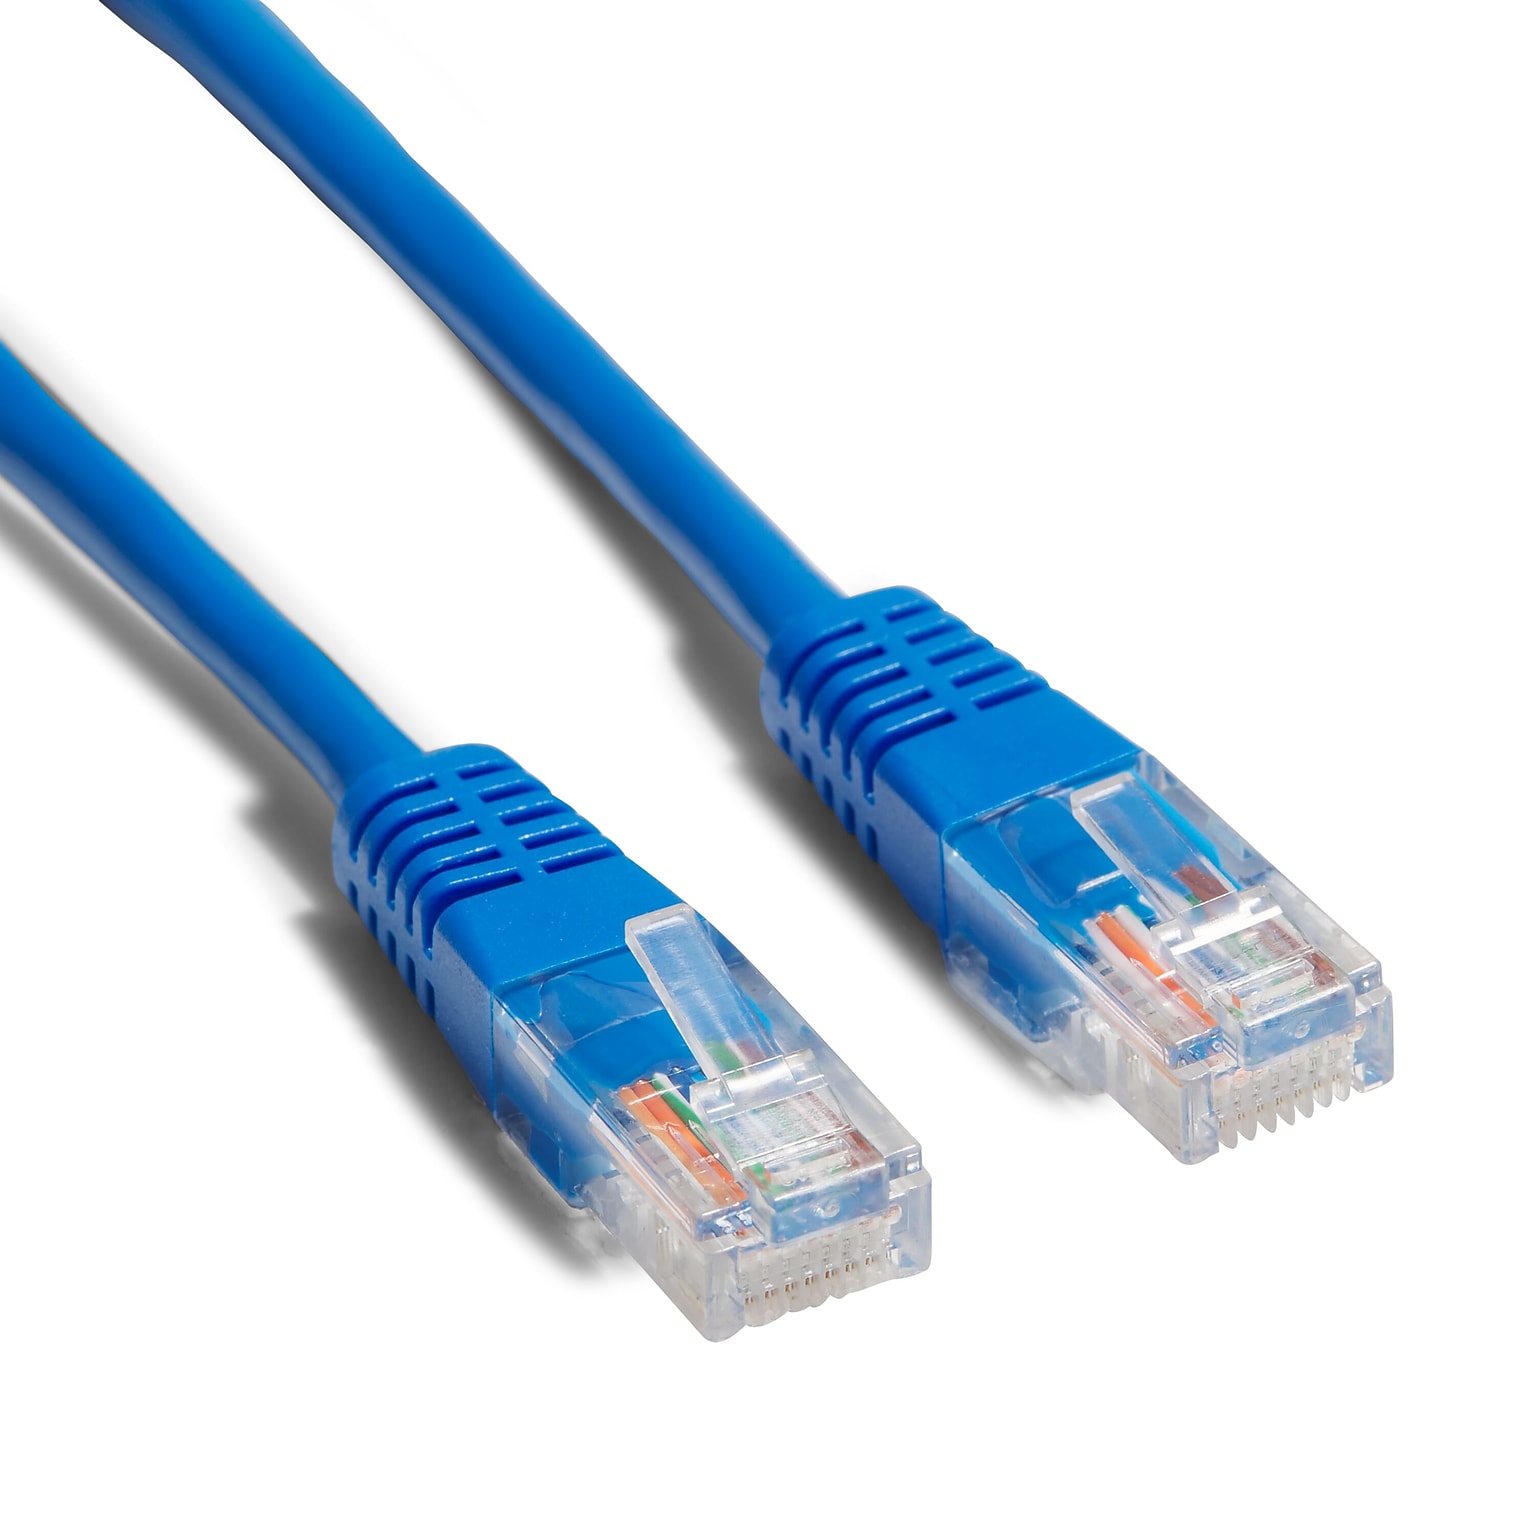 NXT Technologies™ NX29763 14 CAT-5e Cable, Blue